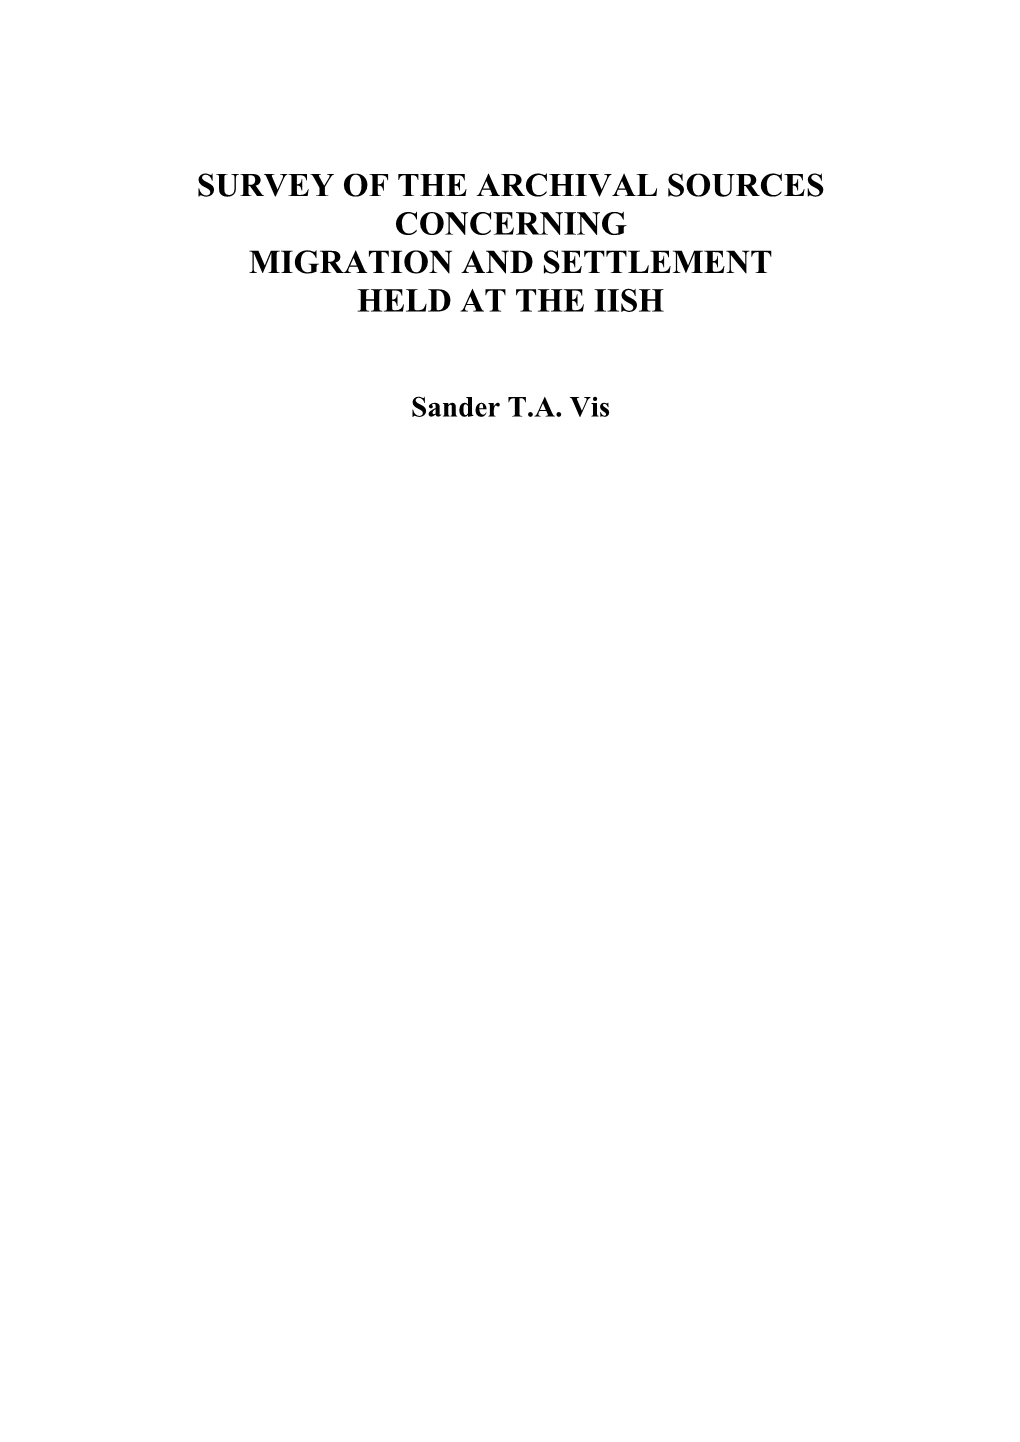 Survey of the Archival Sources Concerning Migration and Settlement Held at the Iish